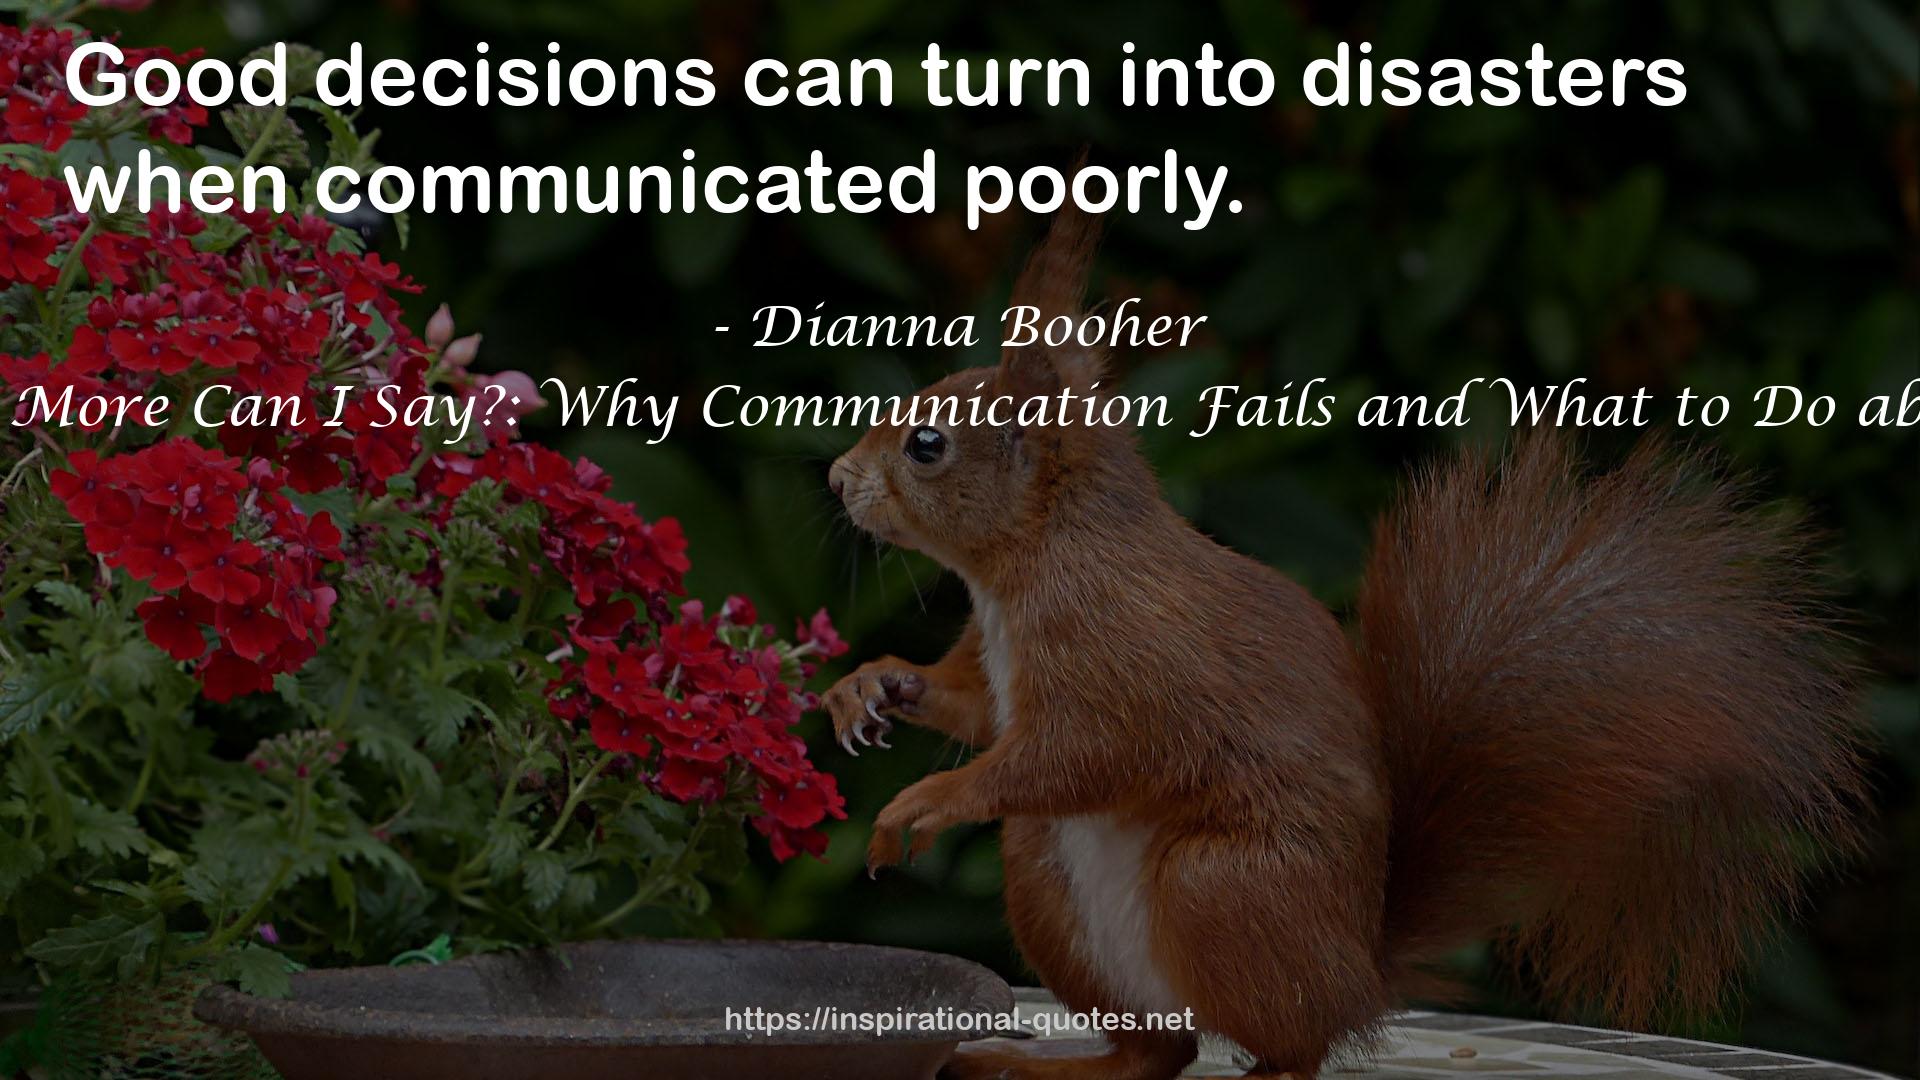 What More Can I Say?: Why Communication Fails and What to Do about It QUOTES